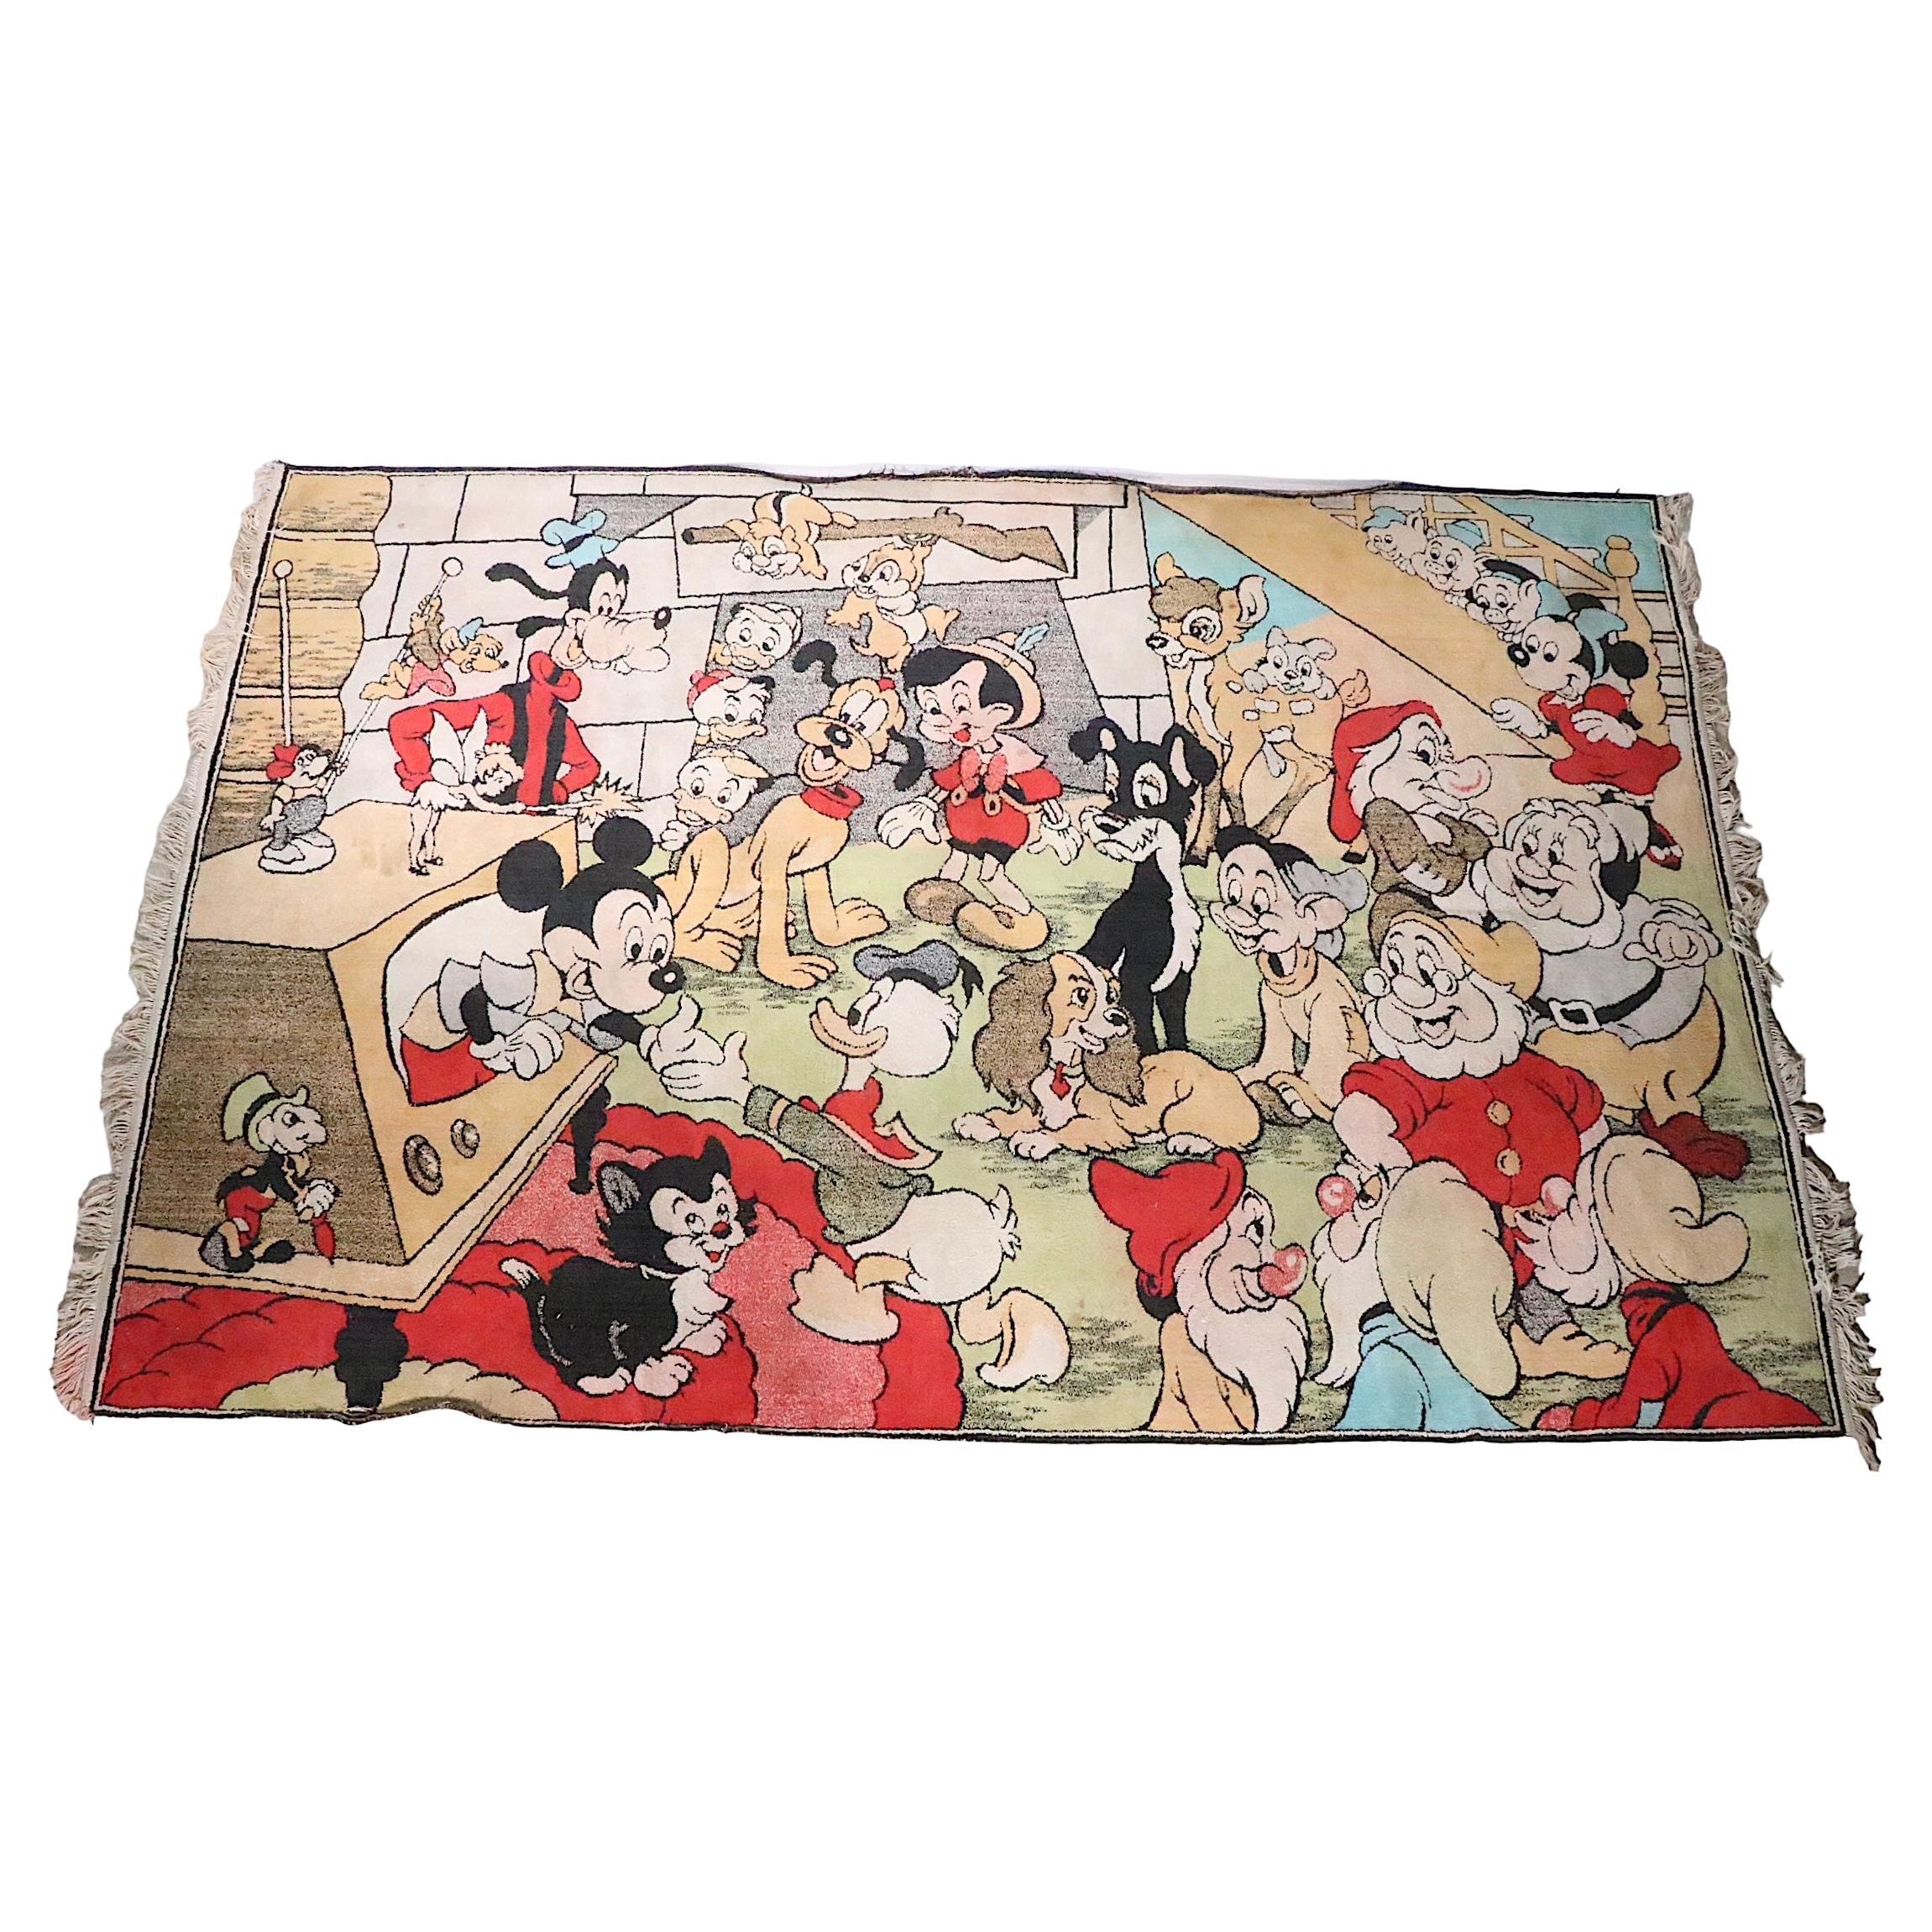 Vintage Disney Character Play Pen Rug c 1960's Mickey Mouse Donald Duck etc. For Sale